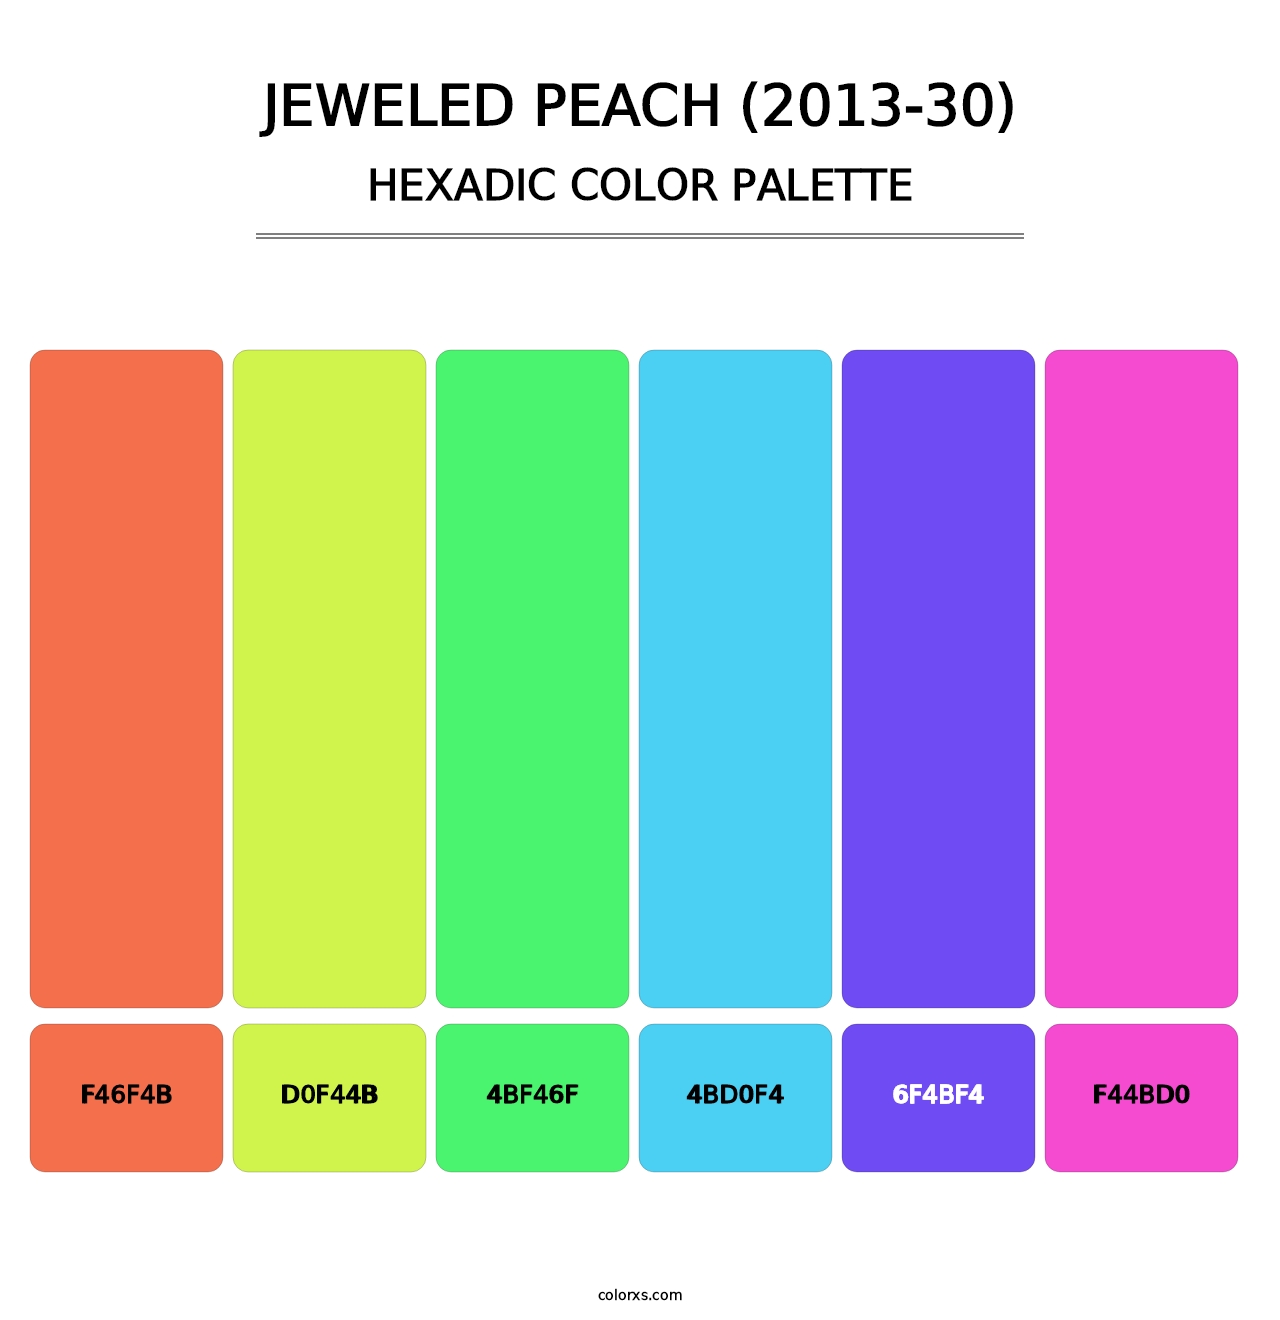 Jeweled Peach (2013-30) - Hexadic Color Palette